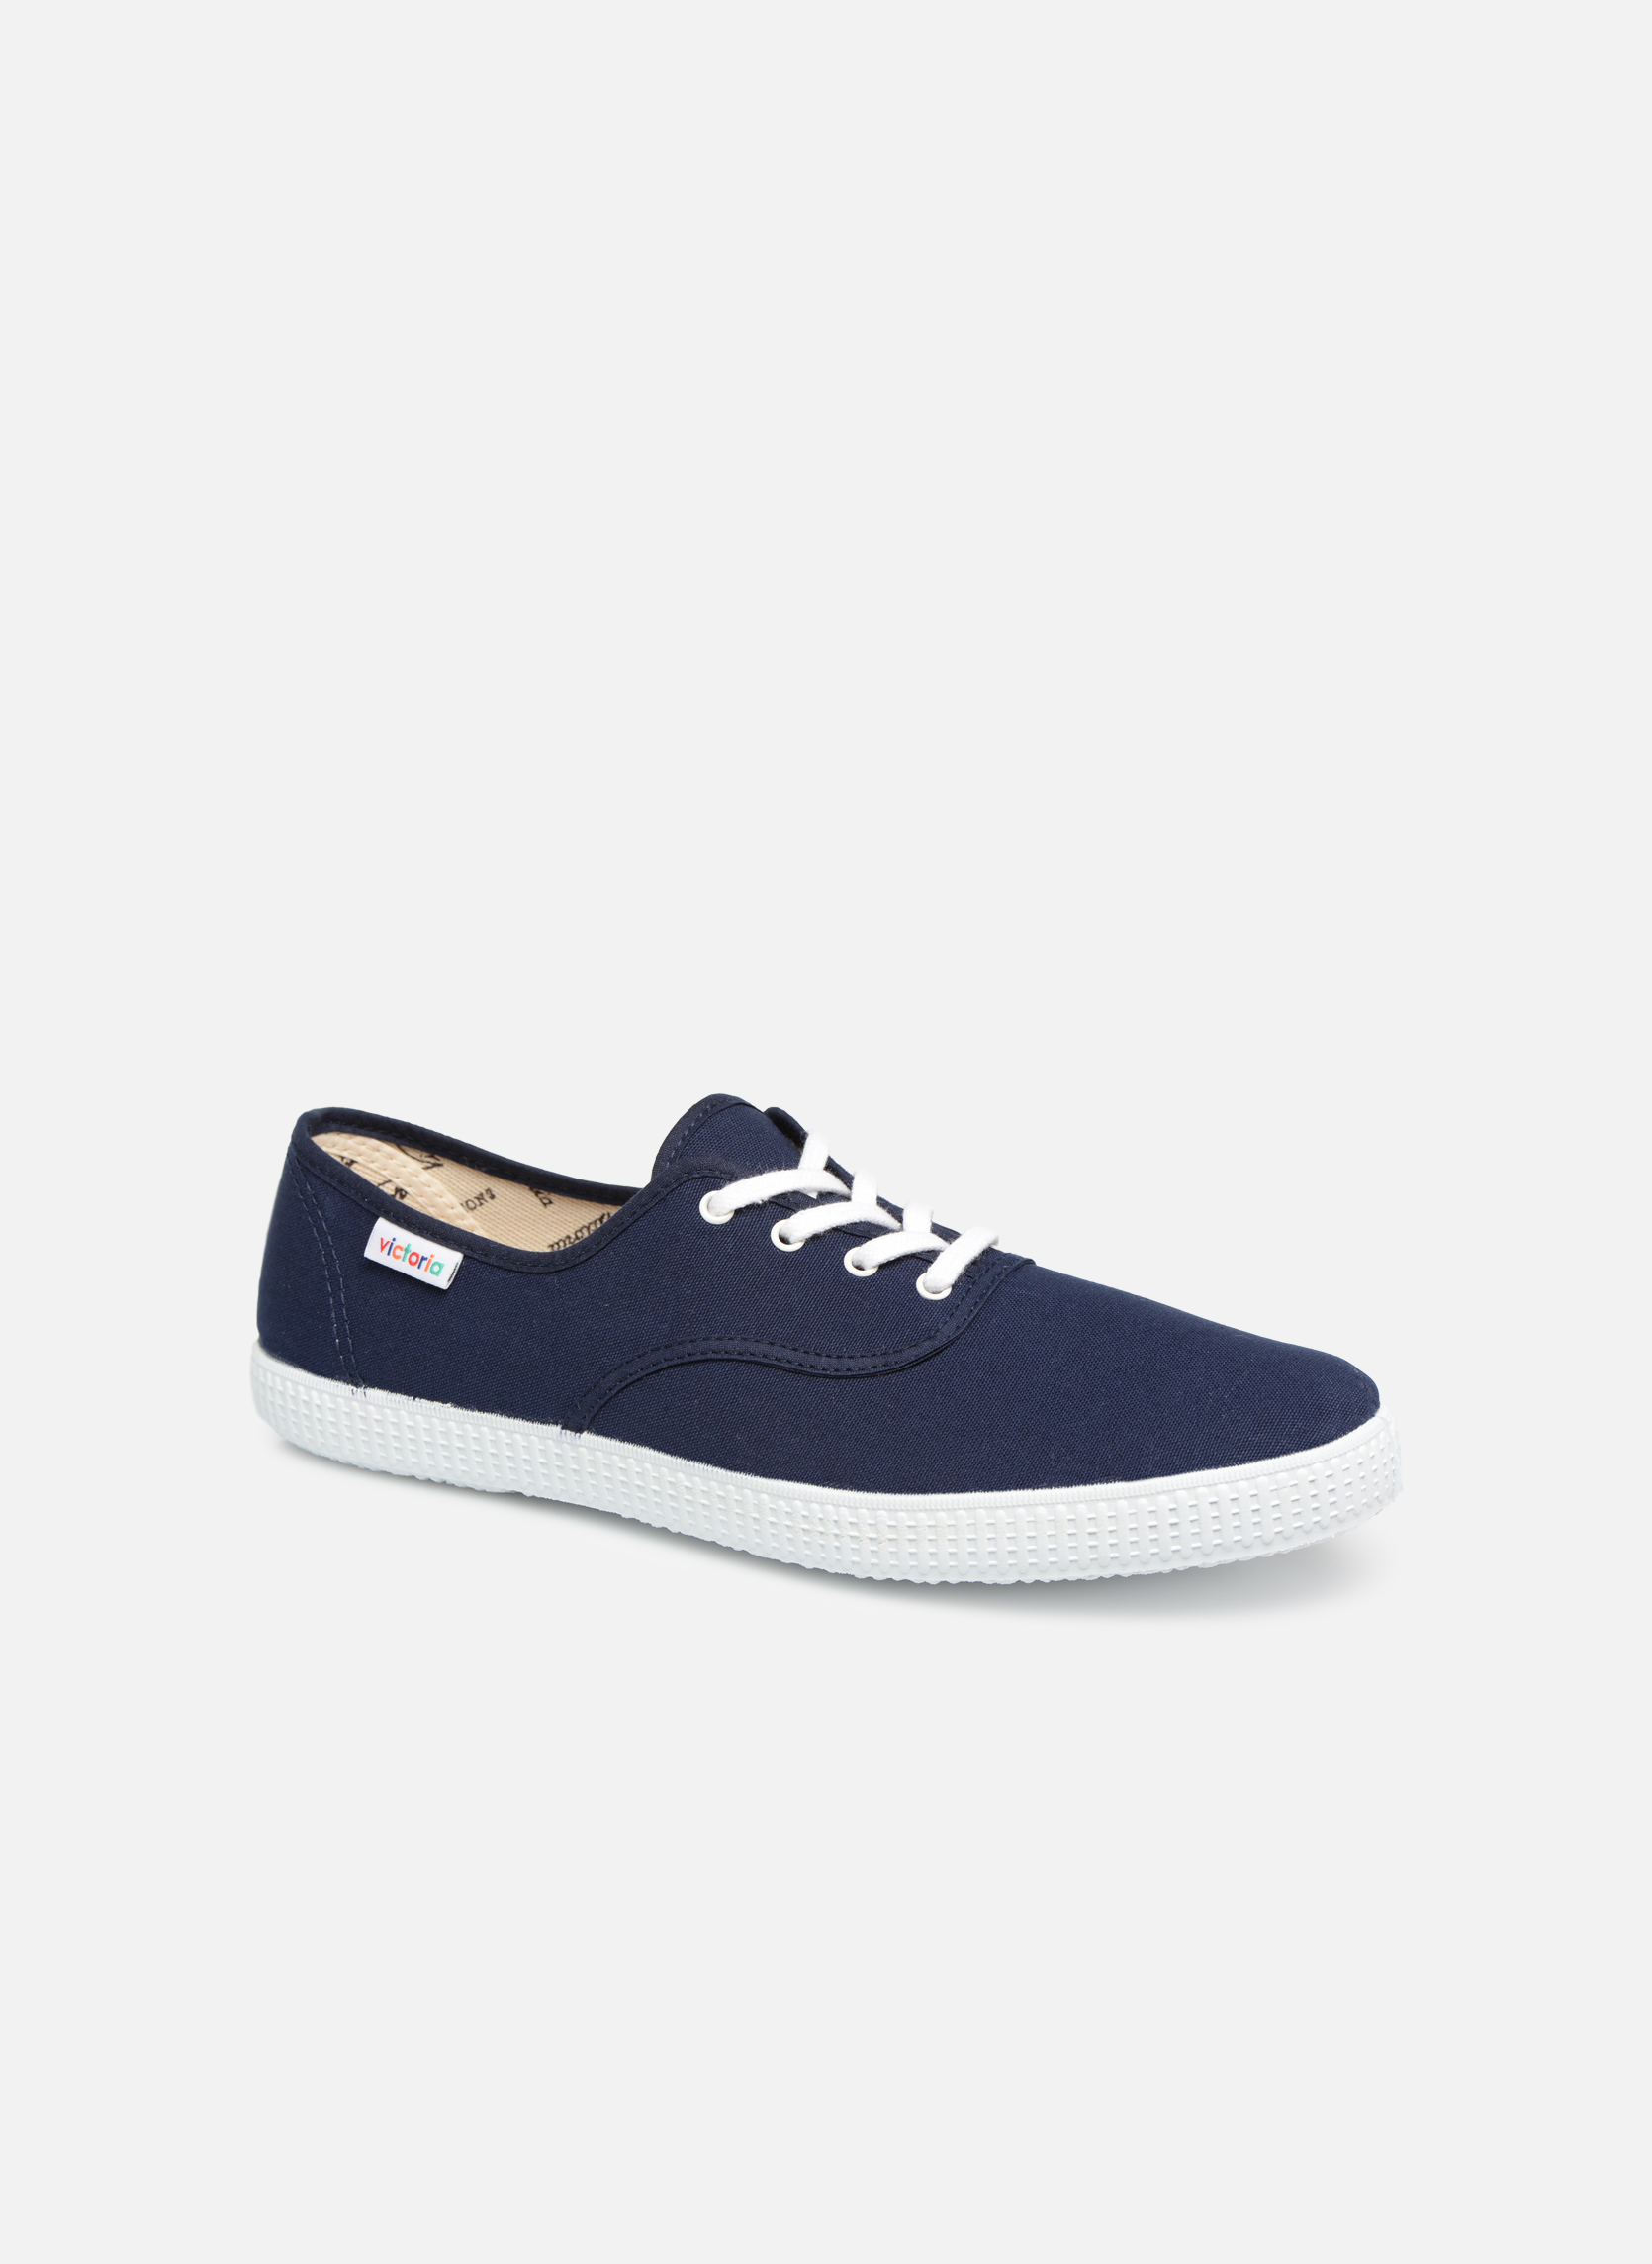 Victoria | Shoes online from Victoria